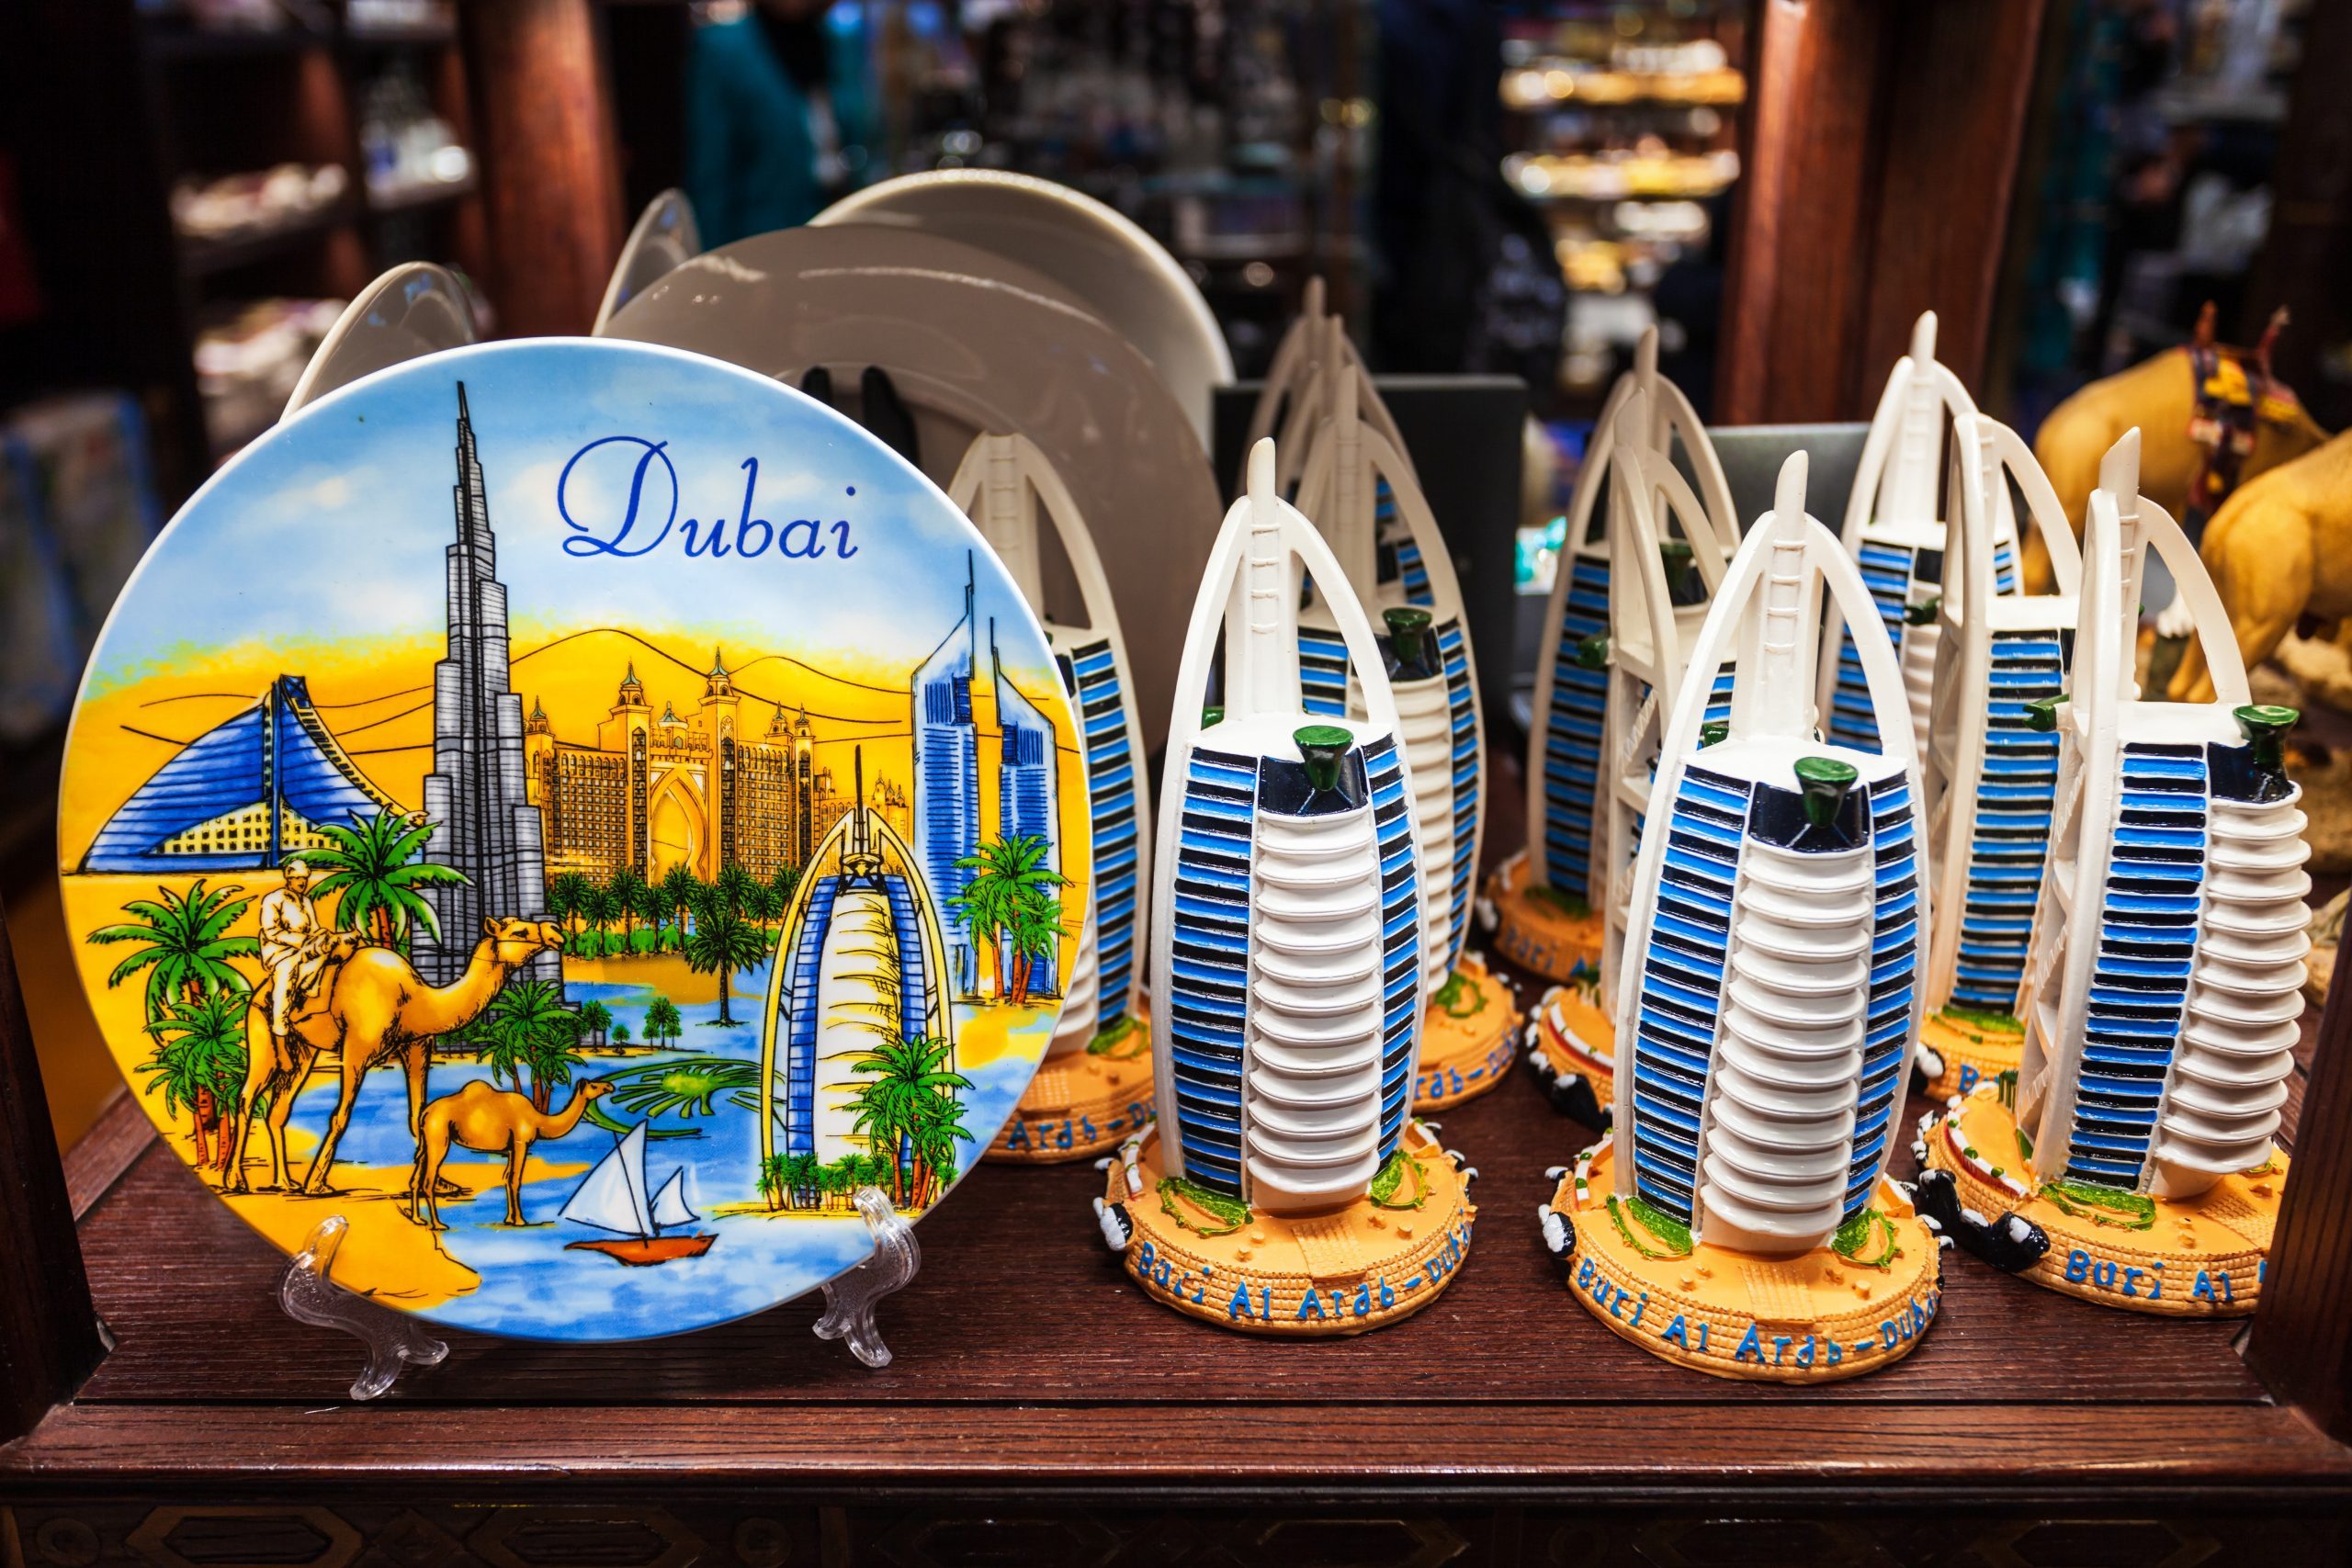 <p>Another great use of duty-free shopping at airports is scooping up last-minute gifts from your destinations. Whether you are buying ornate snow globes for kids or fancy hand-painted fans for your partner, the trinkets and souvenirs at a duty-free shop allow you to make sure you show everyone back home you were thinking of them while you were away—even if you actually forgot to buy gifts while <em>on</em> your <a href="https://www.rd.com/list/best-budget-friendly-beach-destinations/">affordable beach vacation</a>!</p>